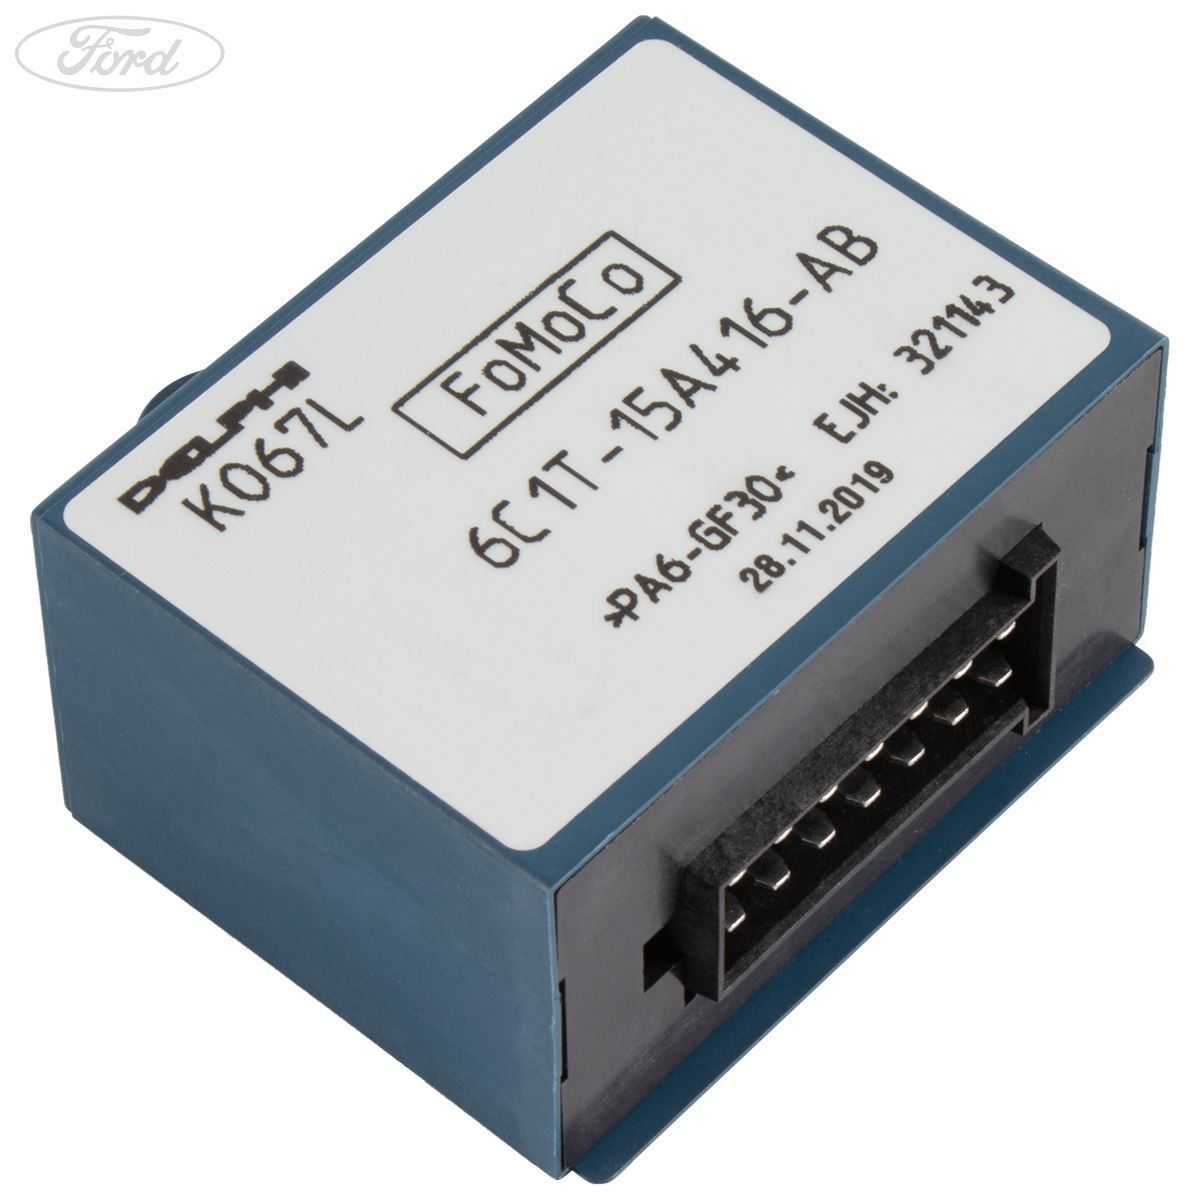 Ford, TRANSIT TOW BAR ELECTRICAL CONTROL RELAY 2006-2014